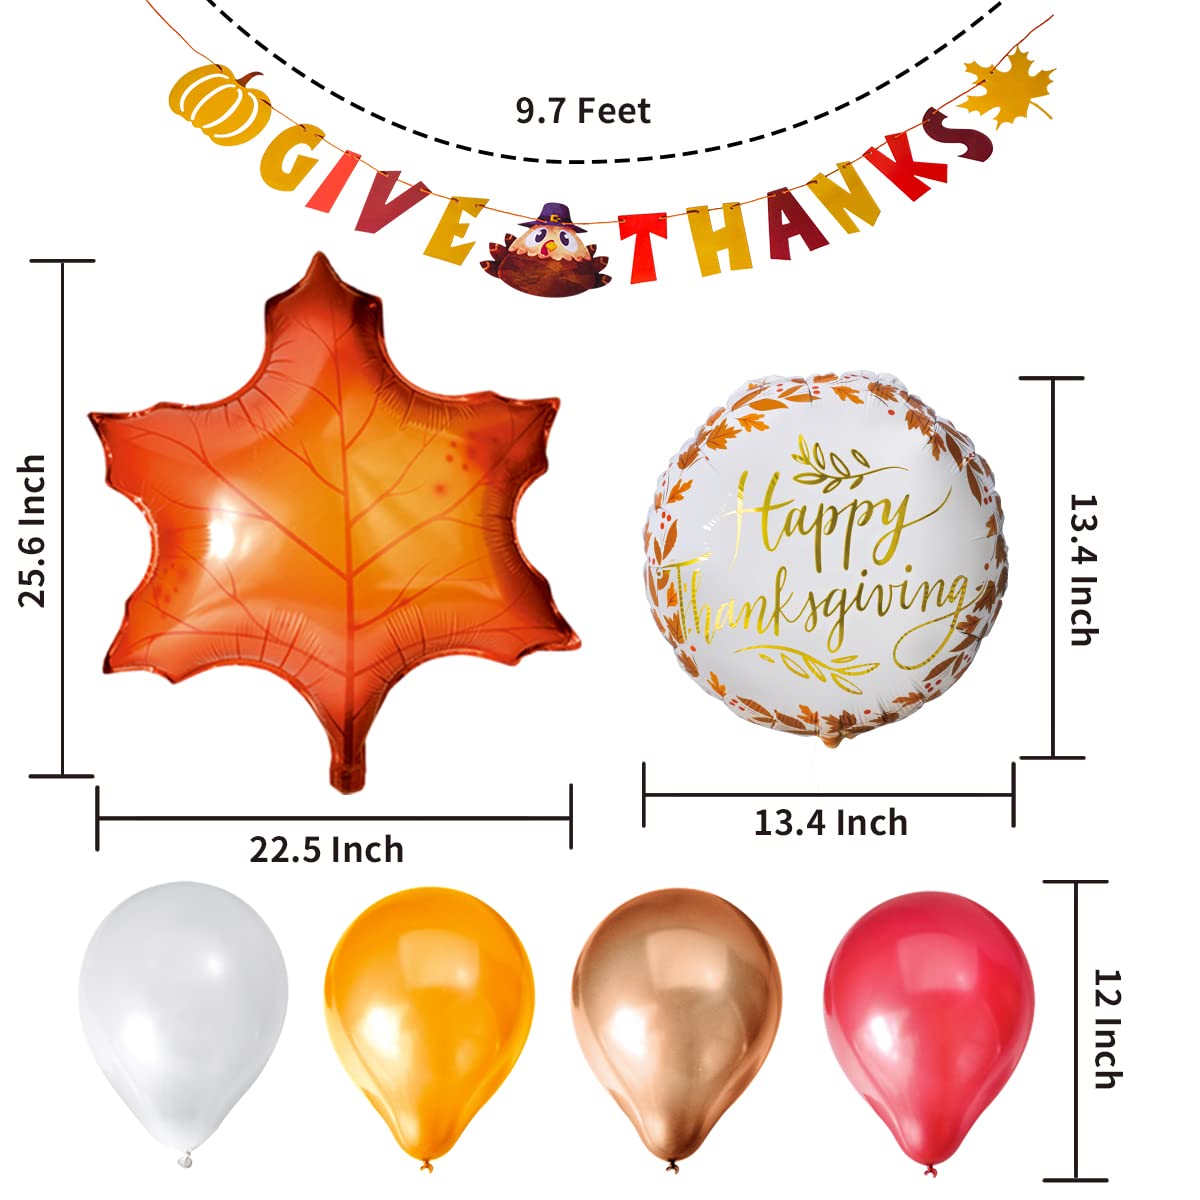 JOYIN 35 Pcs Thanksgiving Party Decoration Set Includes GiveThanks Hanging Banner, Happy Thanksgiving Gold Letter Foil Balloon, 12 Latex and 3 Maple Leaf Ballooons, Fall Holiday Decor Party Supplies